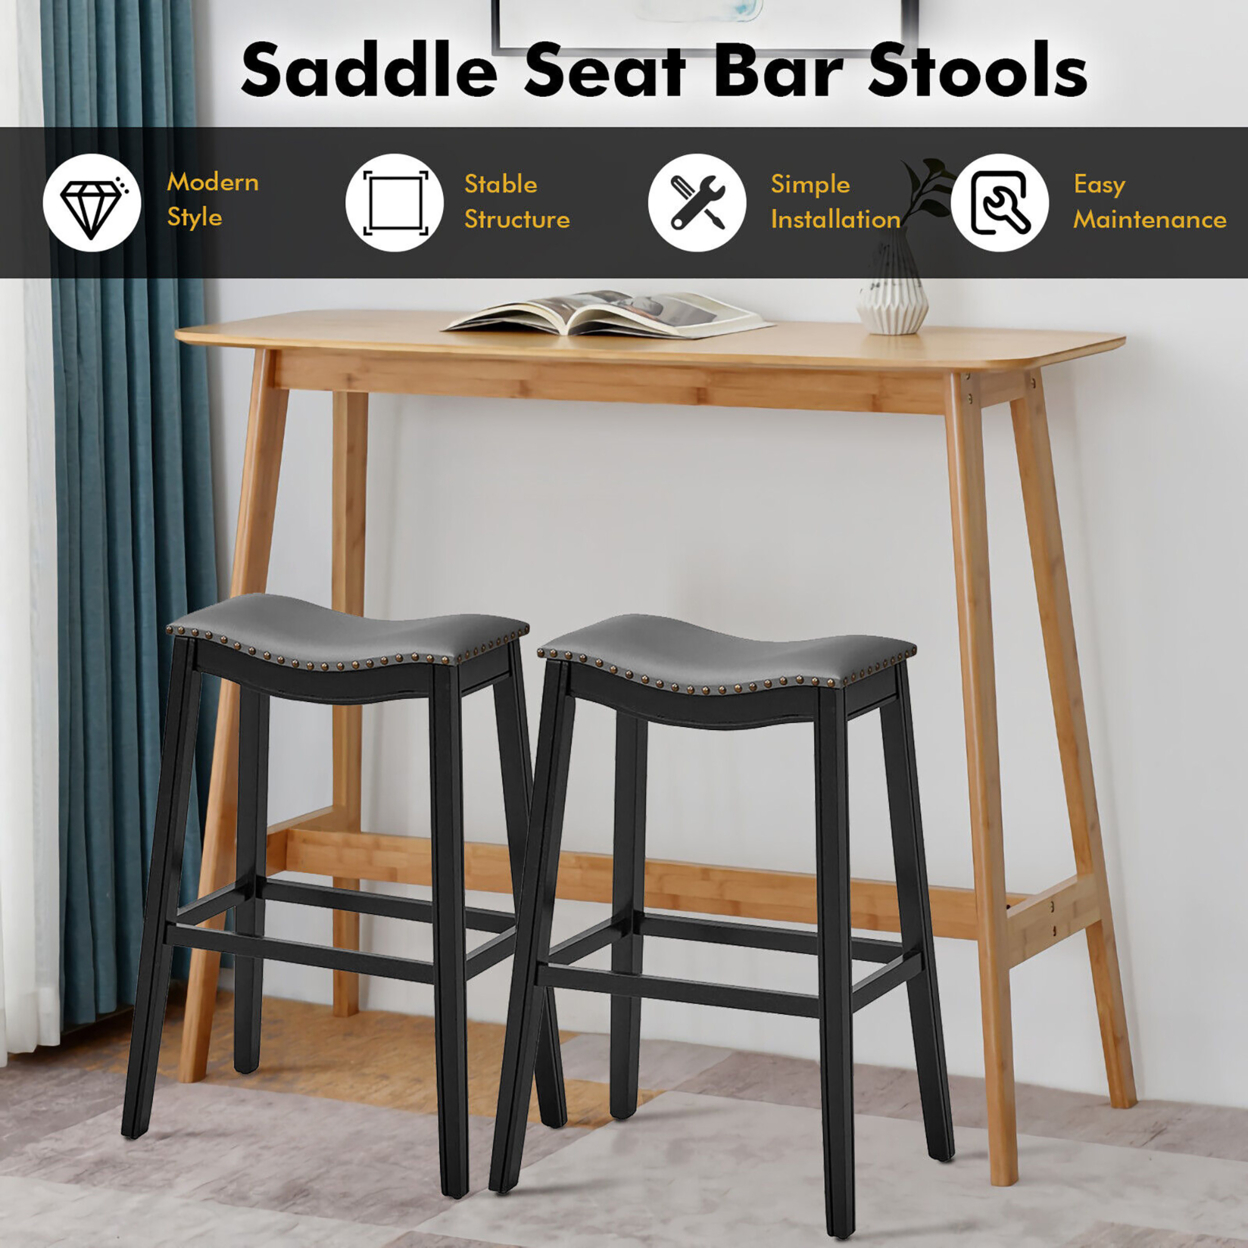 Set Of 2 Saddle Bar Stools Bar Height Kitchen Chairs W/ Rubber Wood Legs - Black